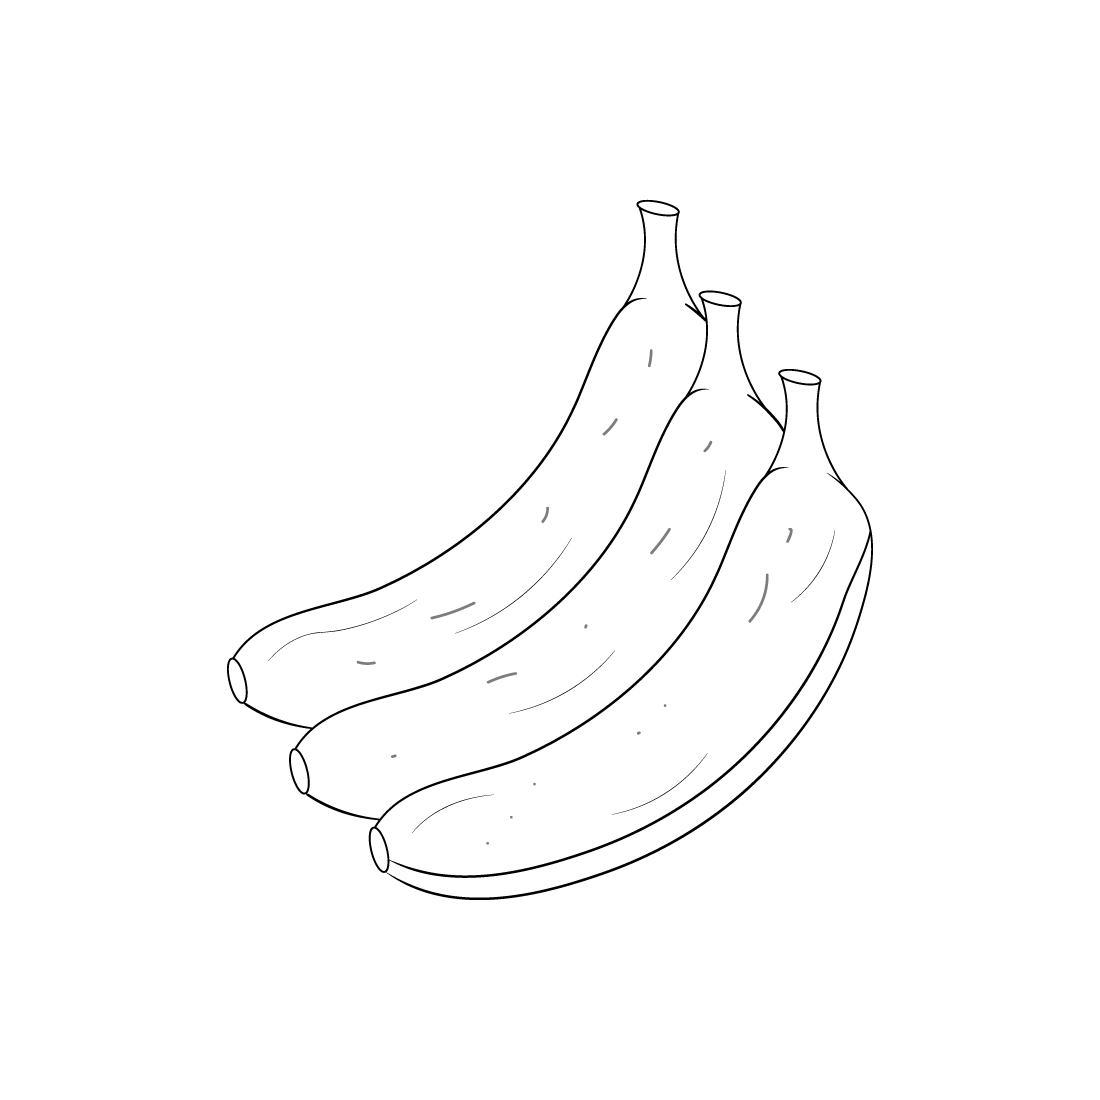 Banana fruits coloring page for adults